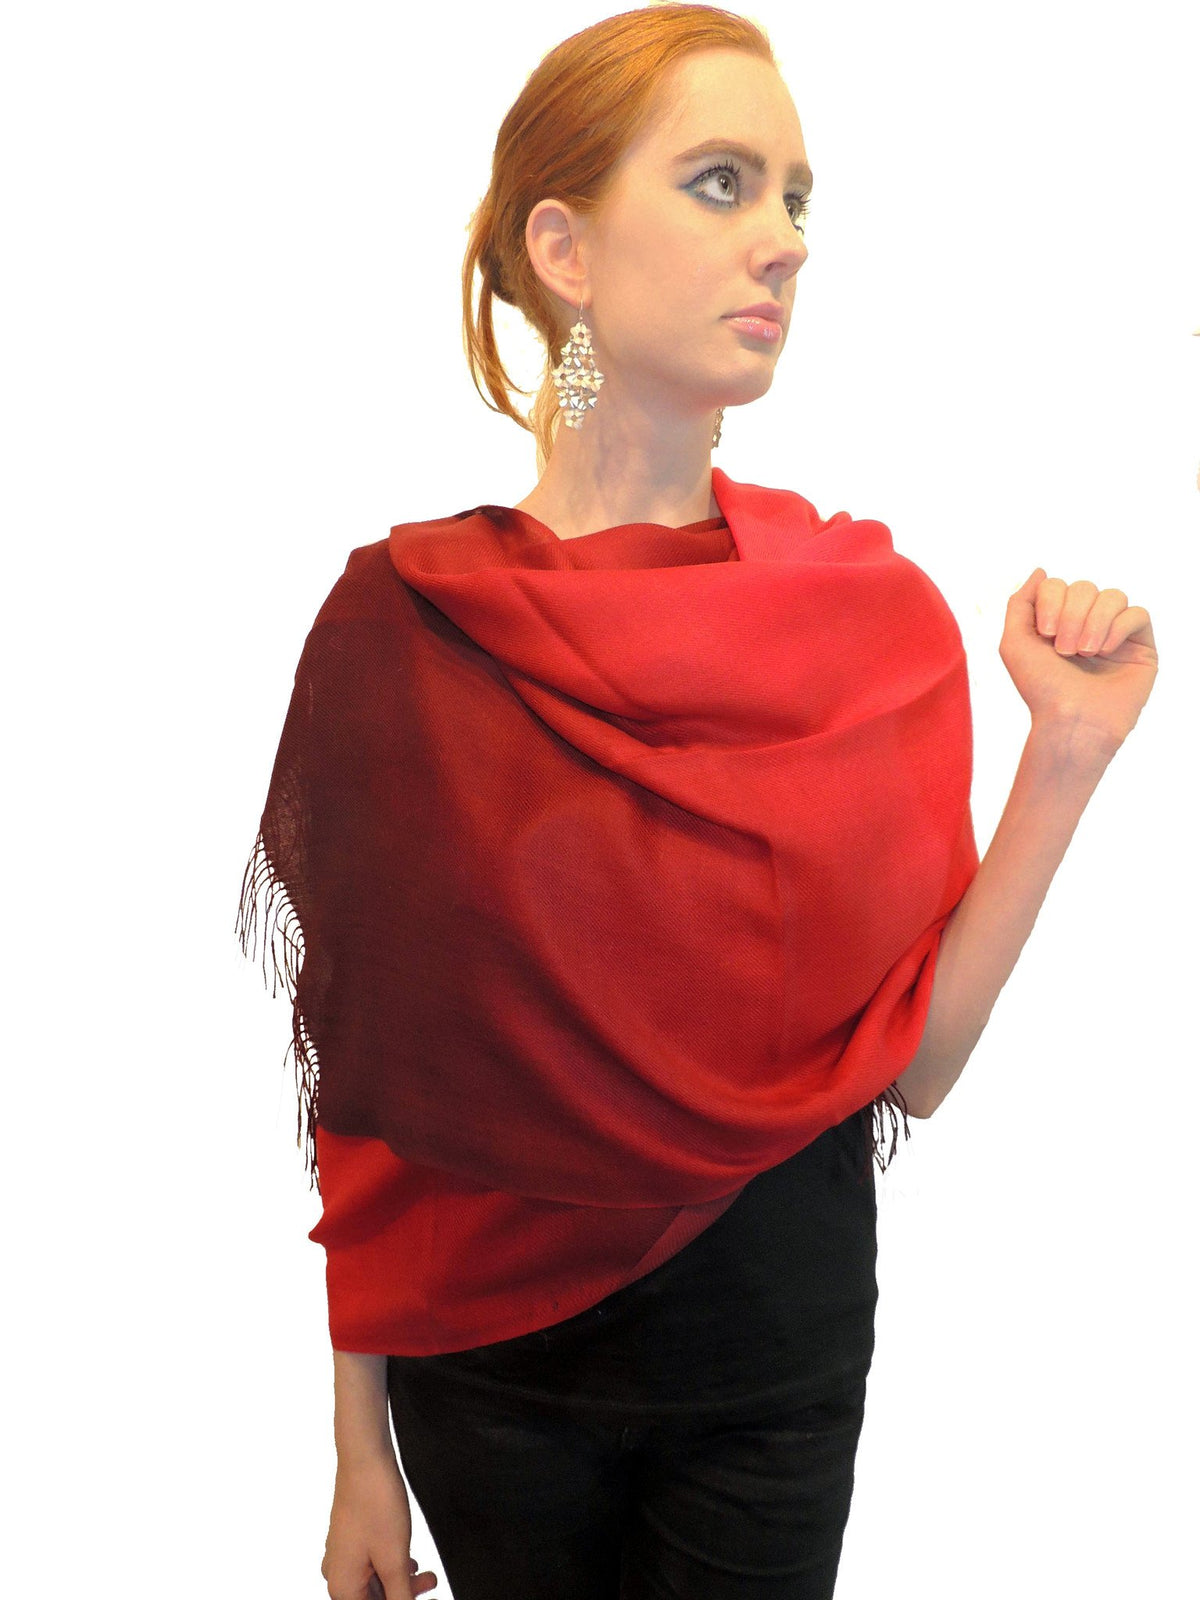 Baby Alpaca &amp; Silk Shawl Two-toned Degrade - Dip Dyed in Red - Qinti - The Peruvian Shop